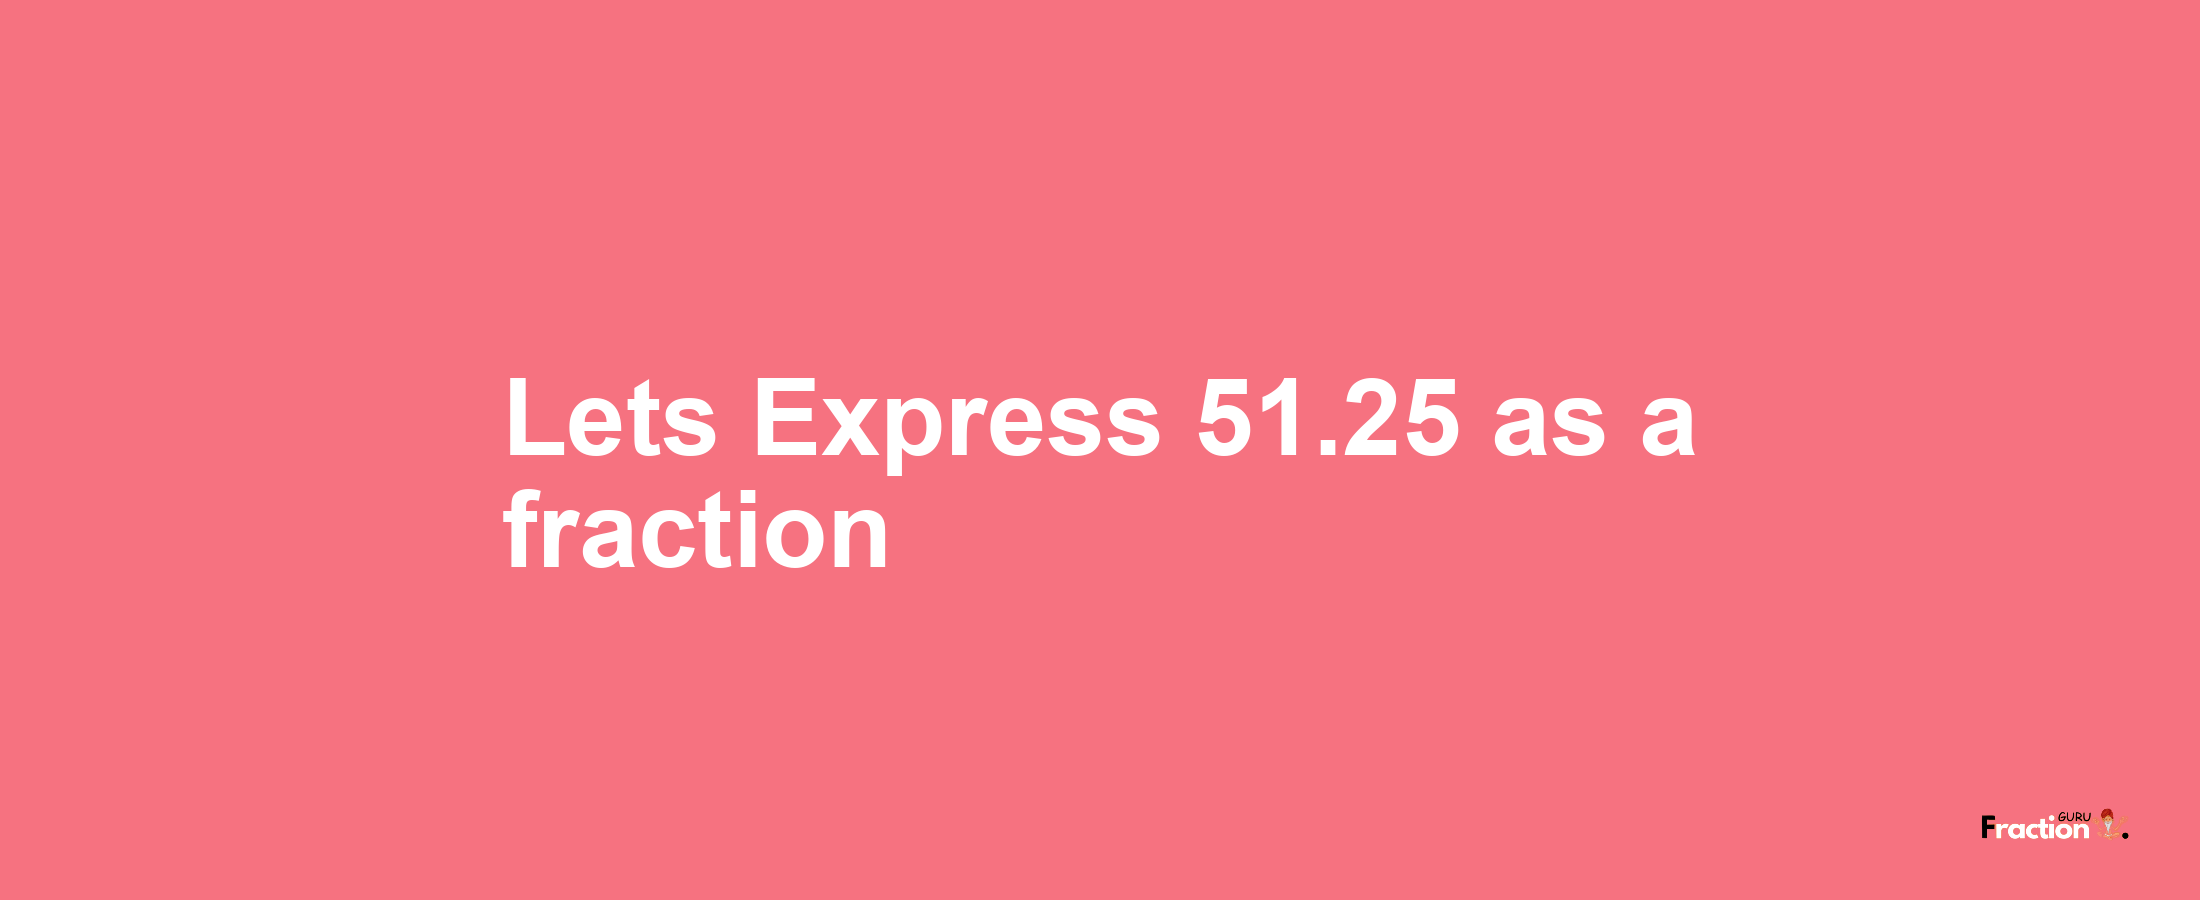 Lets Express 51.25 as afraction